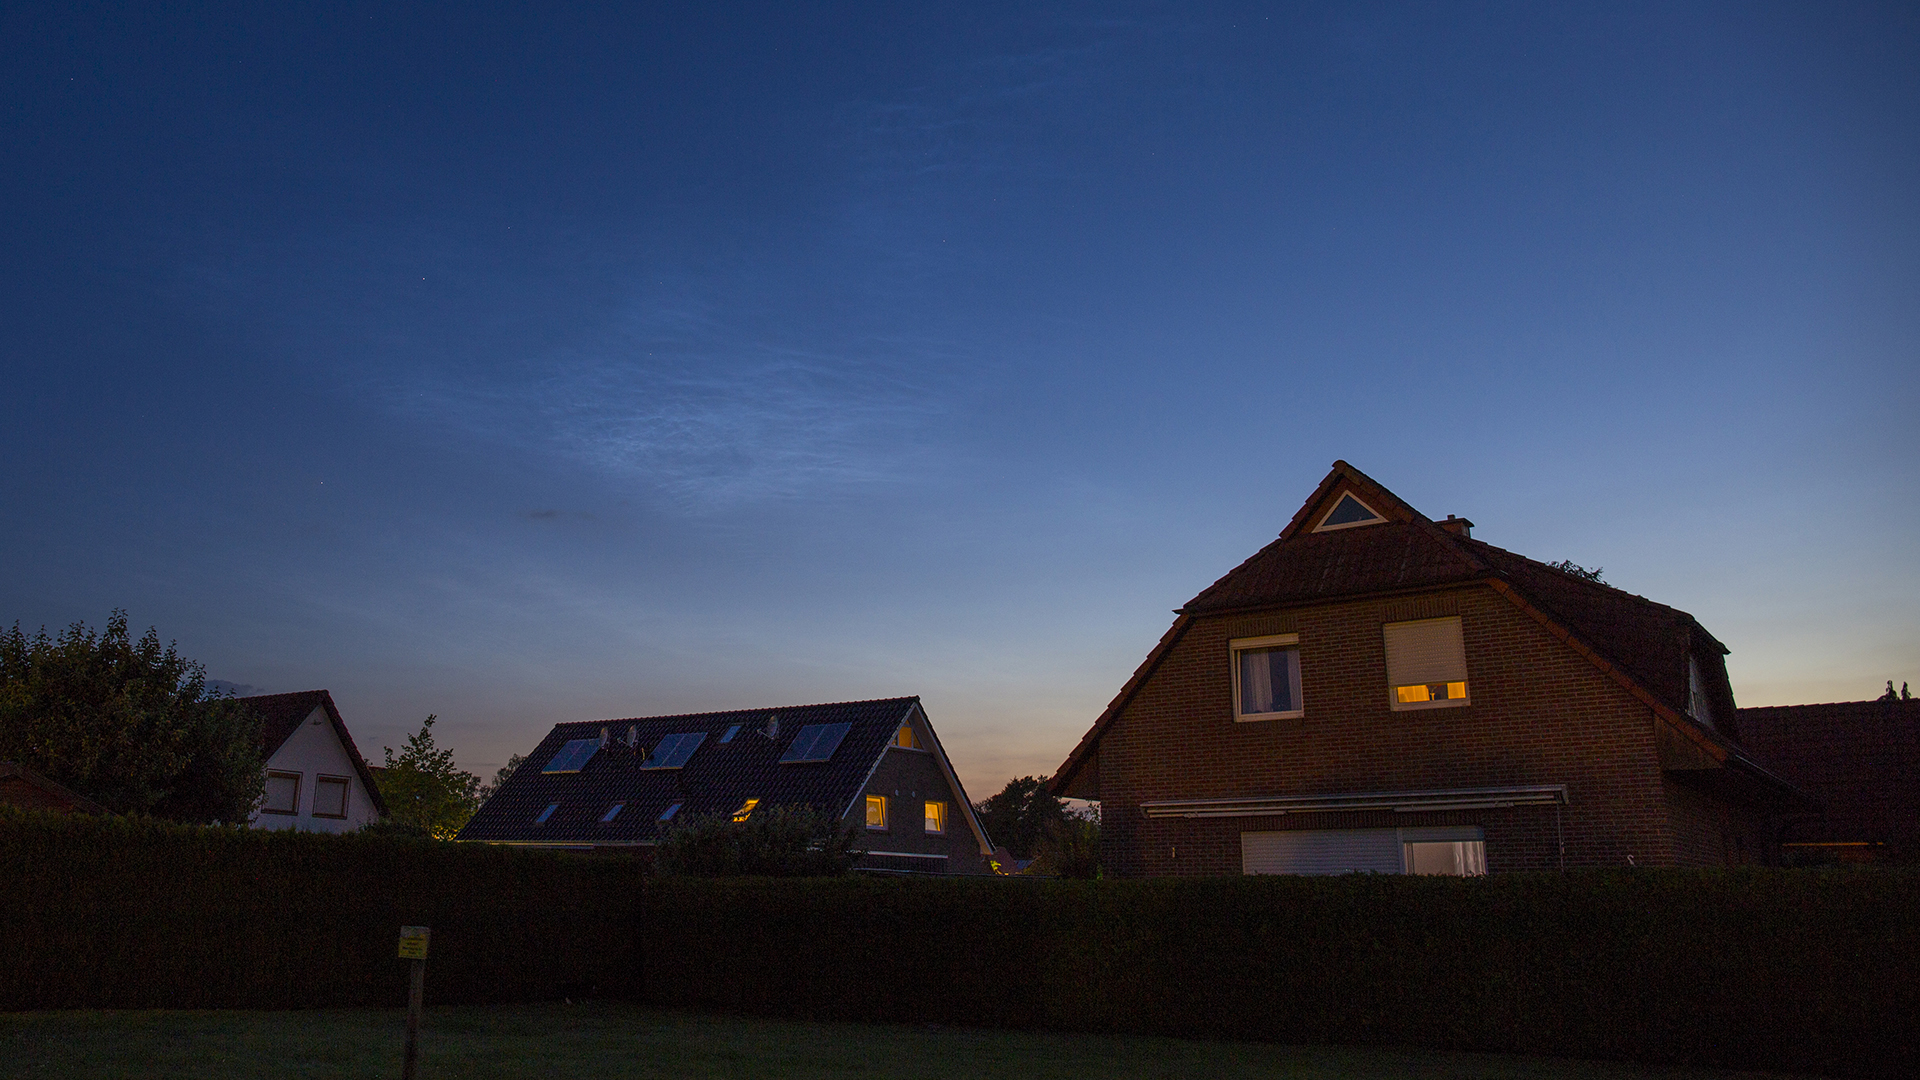 Noctilucent Clouds (2019:06:17 21:21:50 UT, Canon EOS 6D, 2.5s, f/4.5, f=24mm, ISO 200)